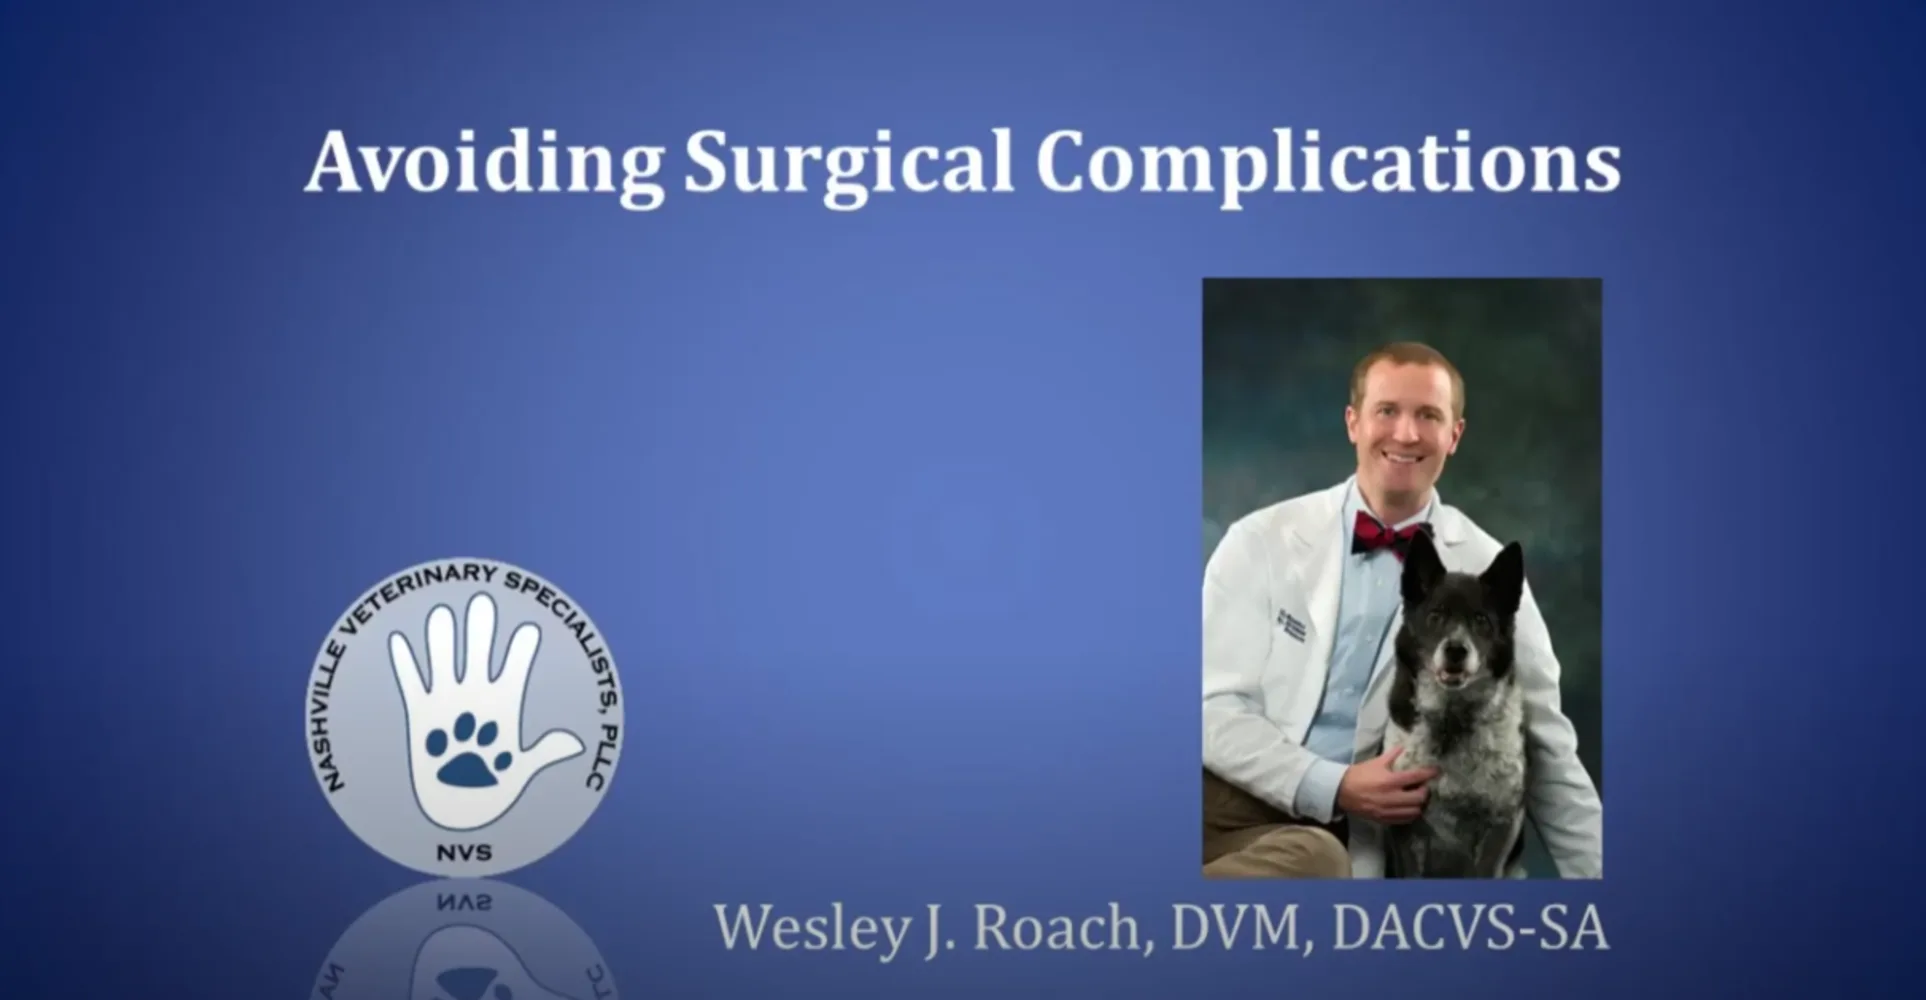 Avoiding Surgical Complications Video at NVS